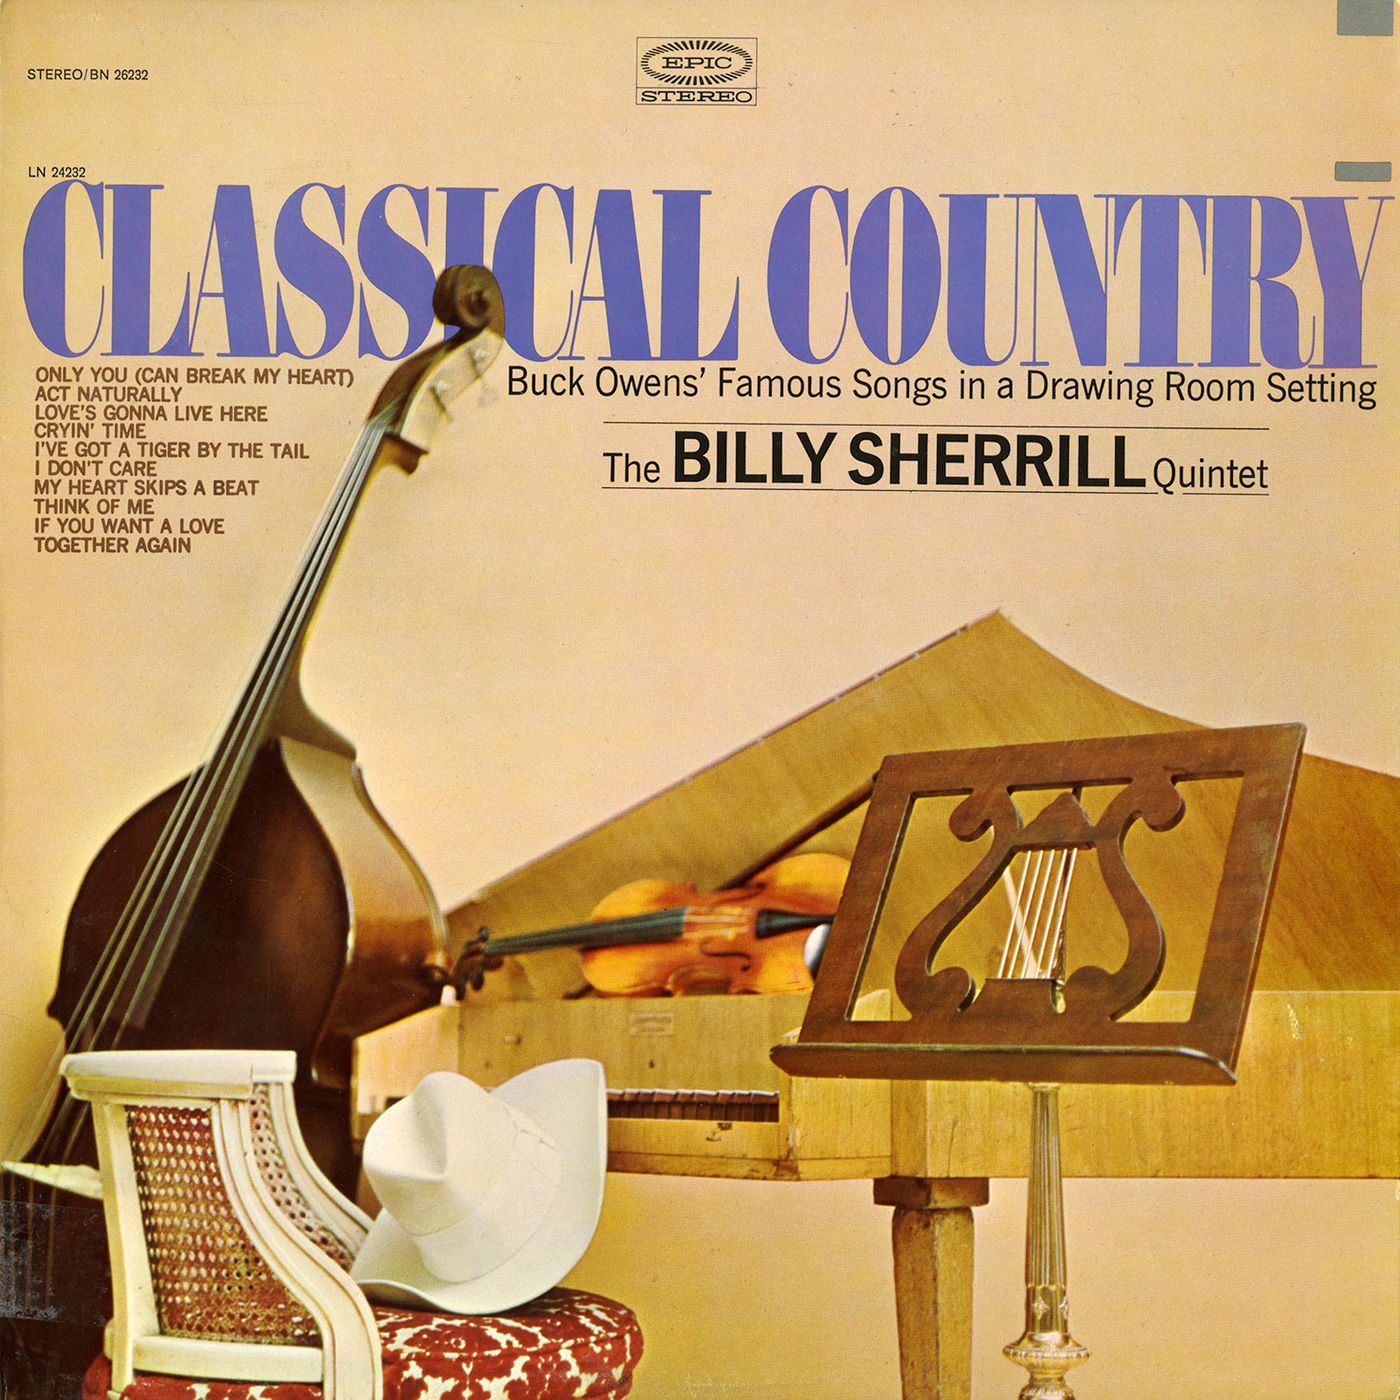 The Billy Sherrill Quintet – Classical Country